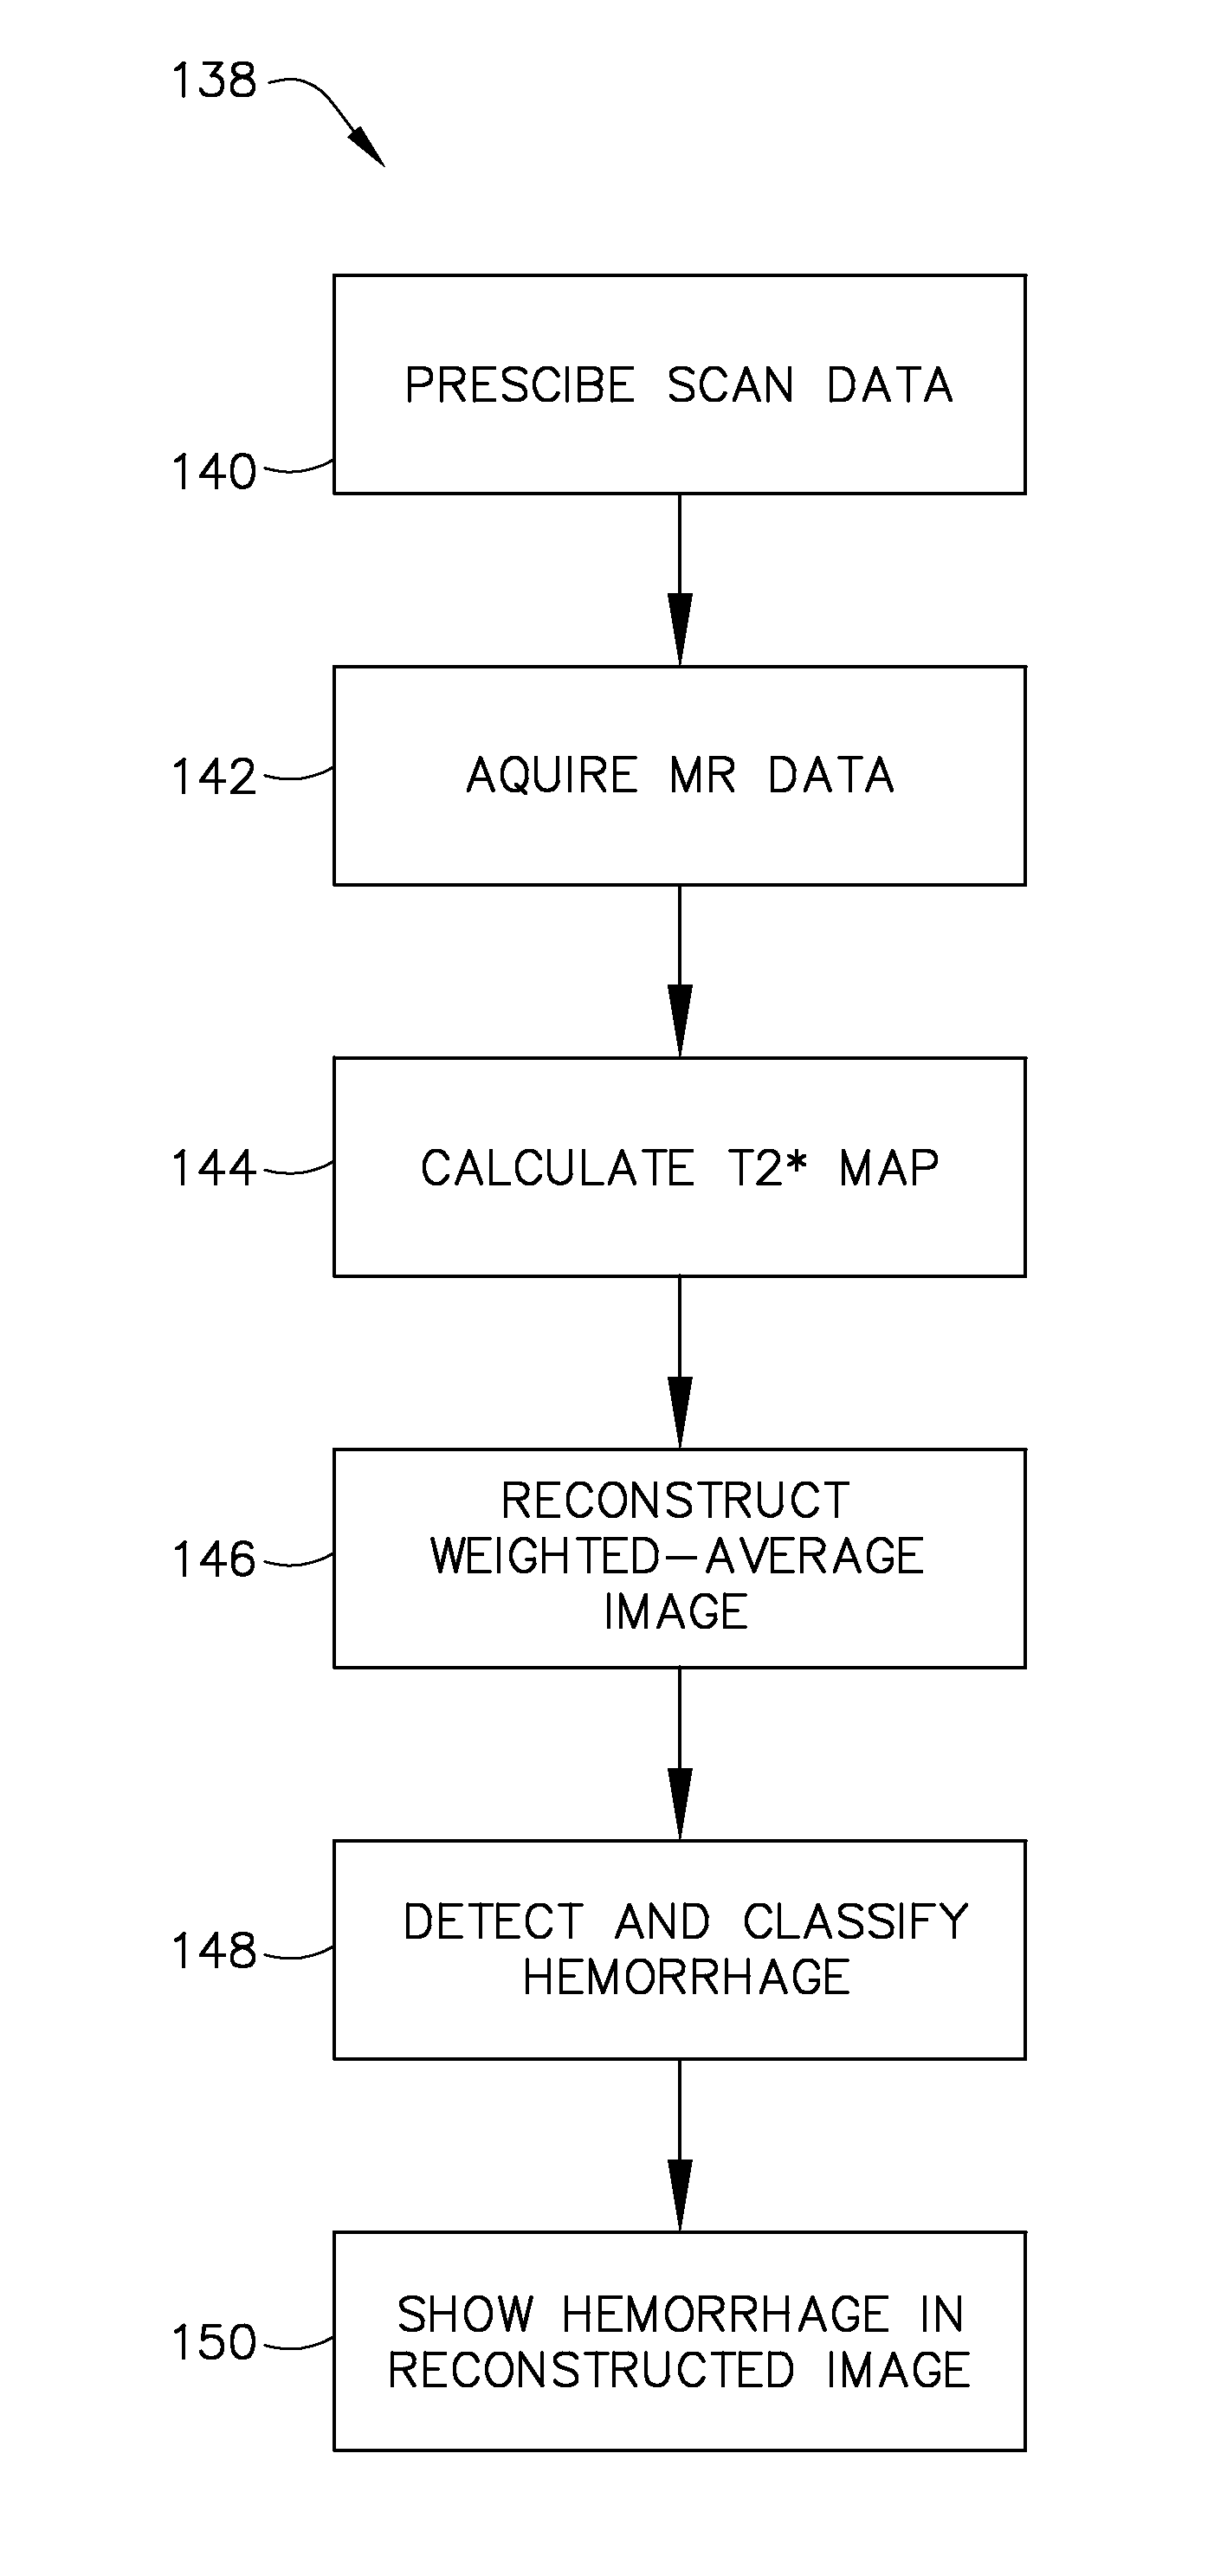 Apparatus and method for detecting and classifying atherosclerotic plaque hemorrhage